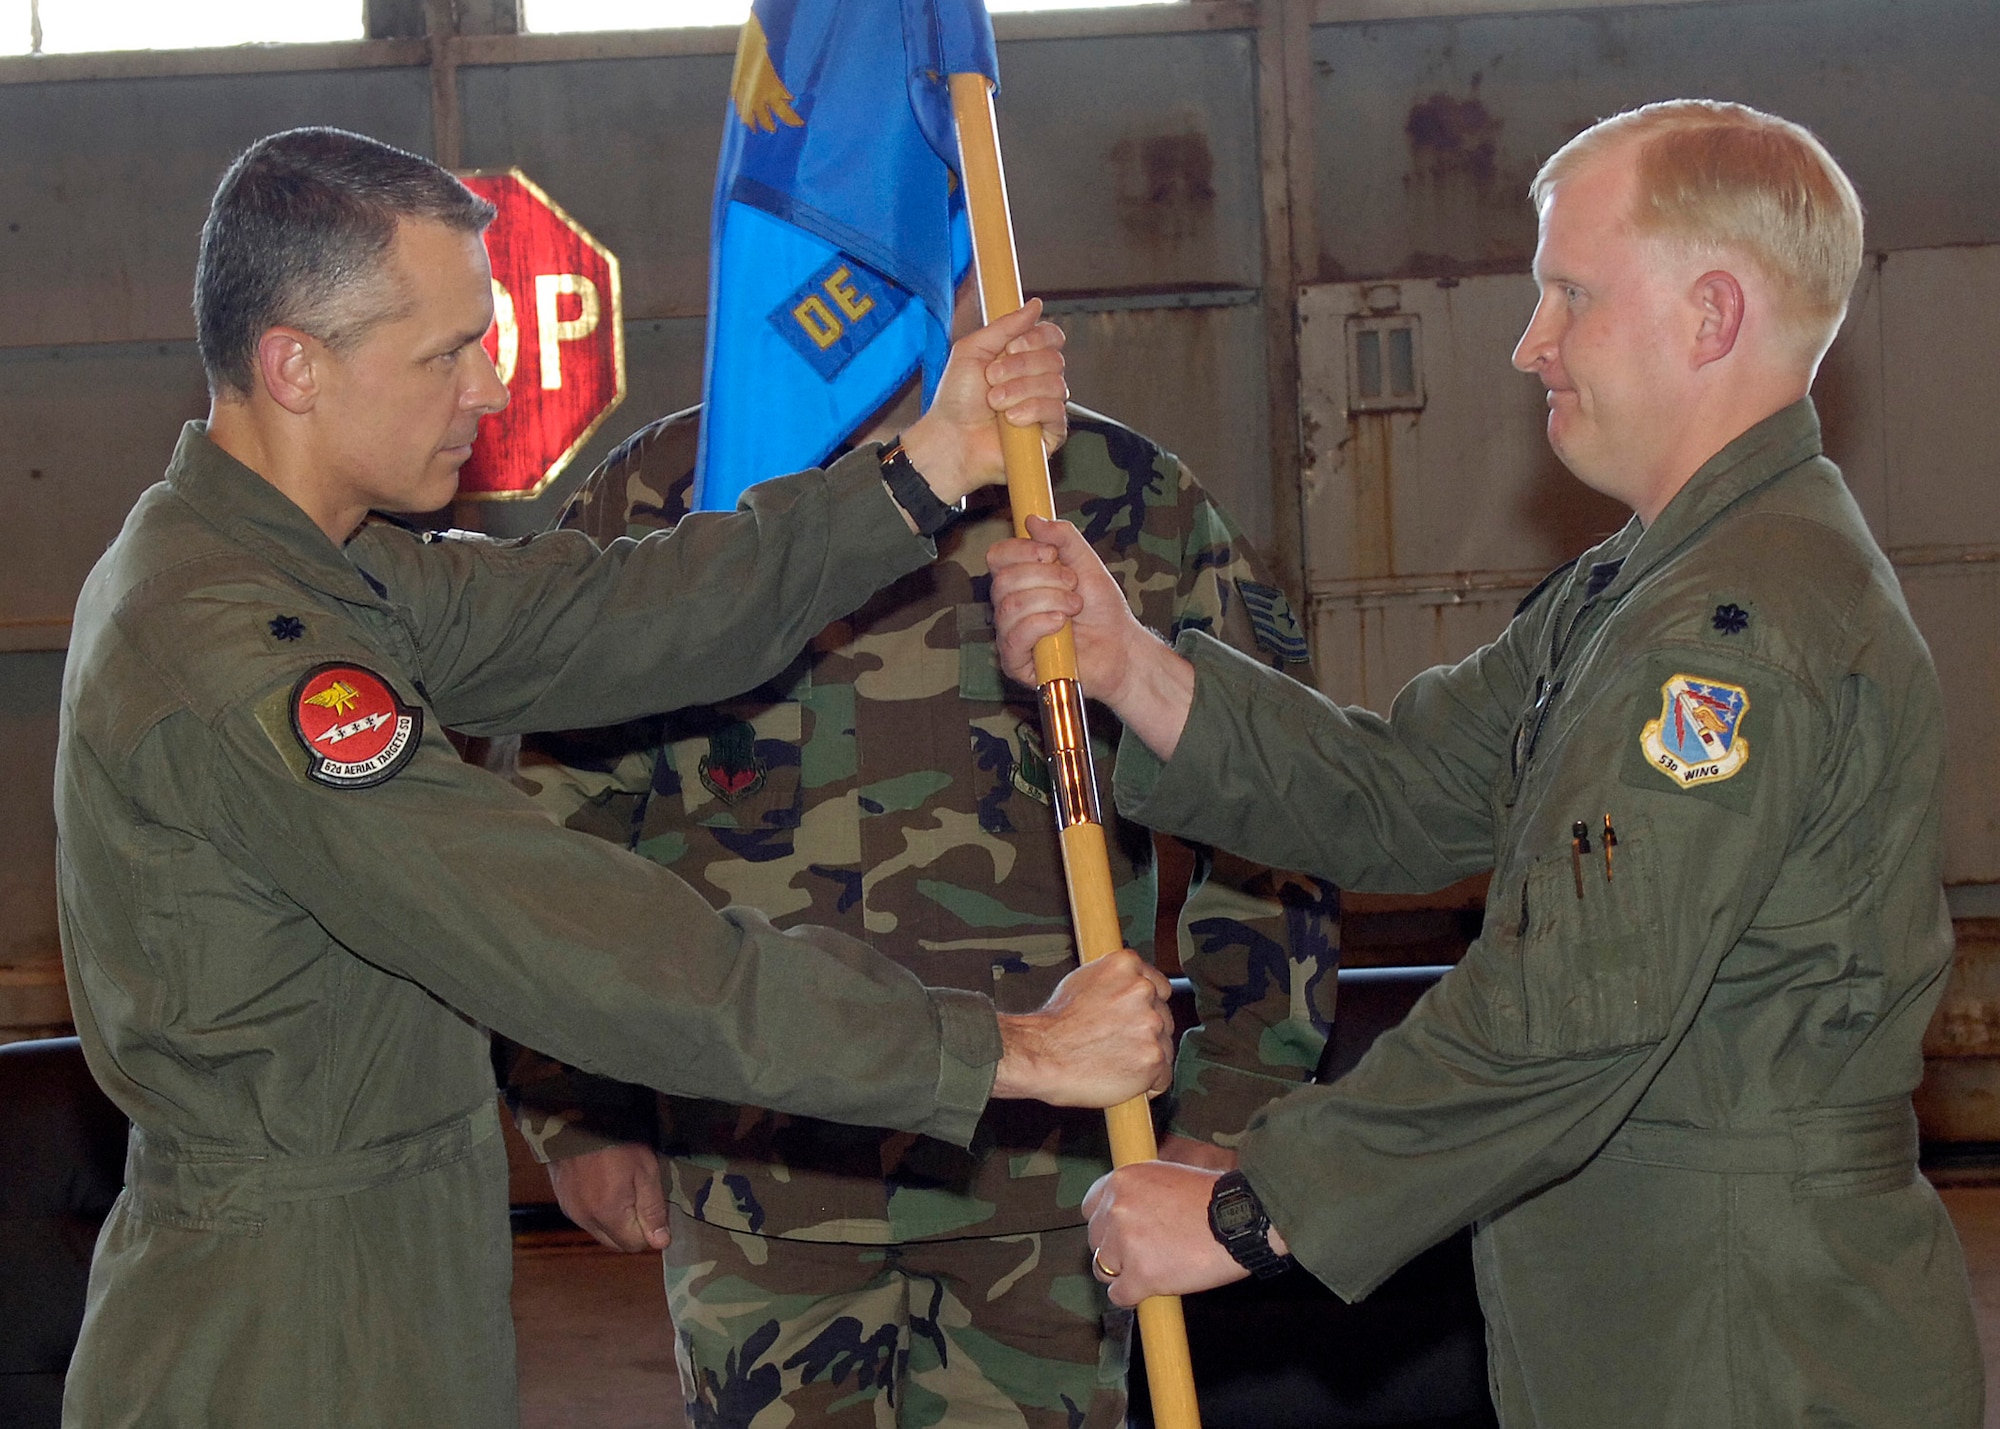 Lt. Col. James Lee, 82nd Aerial Targets Squadron, passes Detachment 1's guidon to its new commander, Lt. Col. Ryan Luchsinger at a ceremony at Holloman Air Force Base, N.M., March 21.  Colonel Luchsinger assumed command from Lt. Col. Joel Rush.  Courtesy photo. 